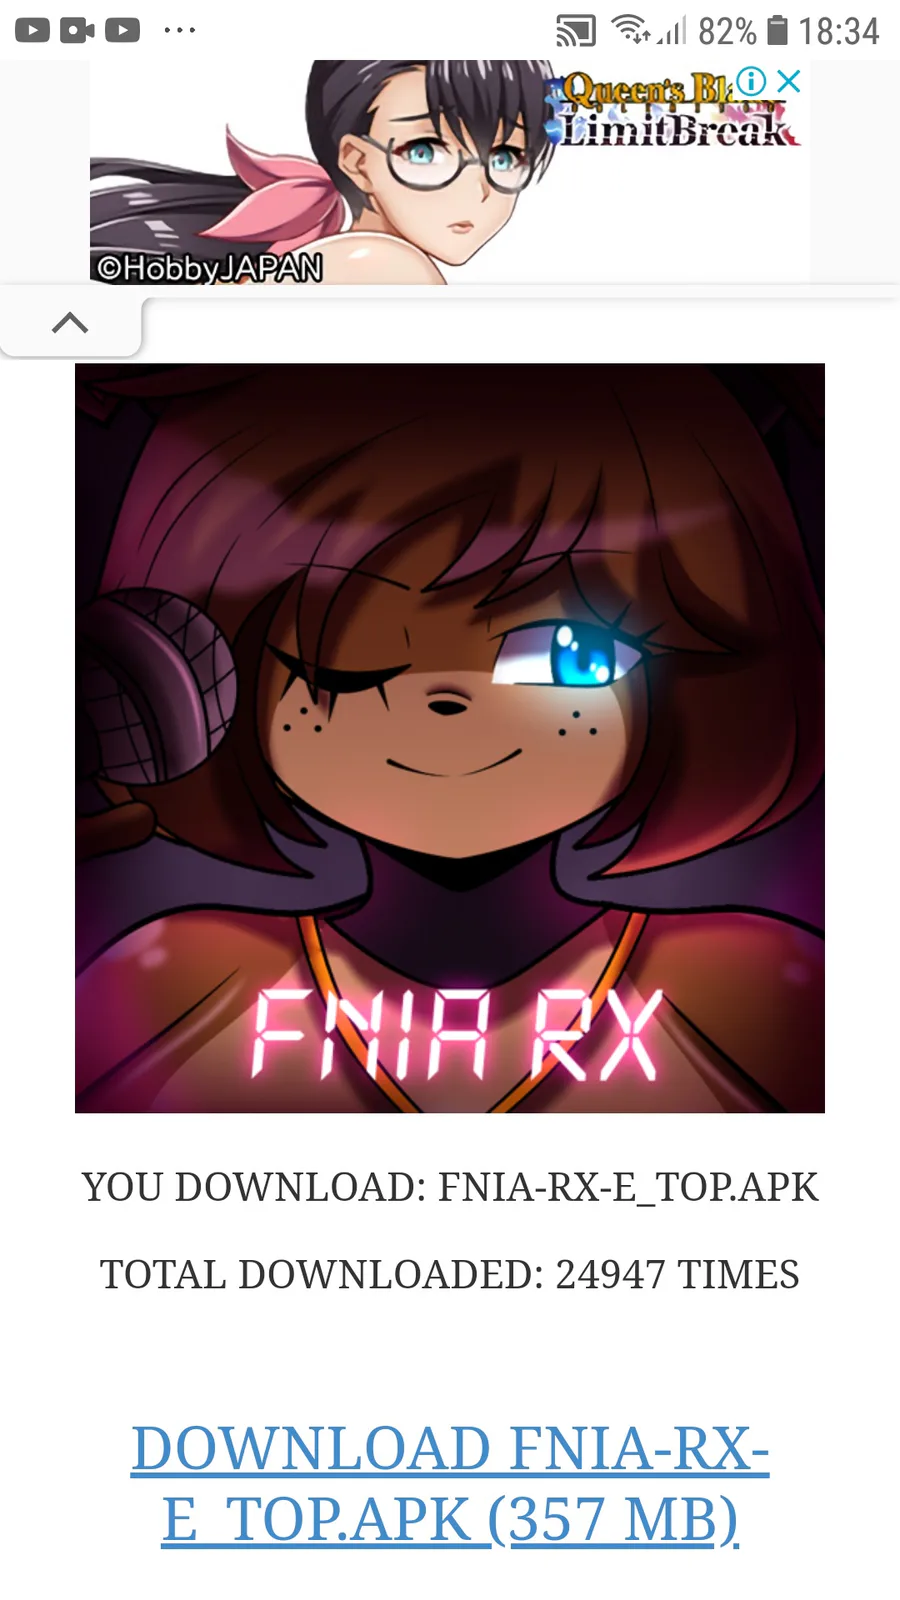 Download Five Nights in Anime RX Edition (FNiA RX) v1.5 APK on